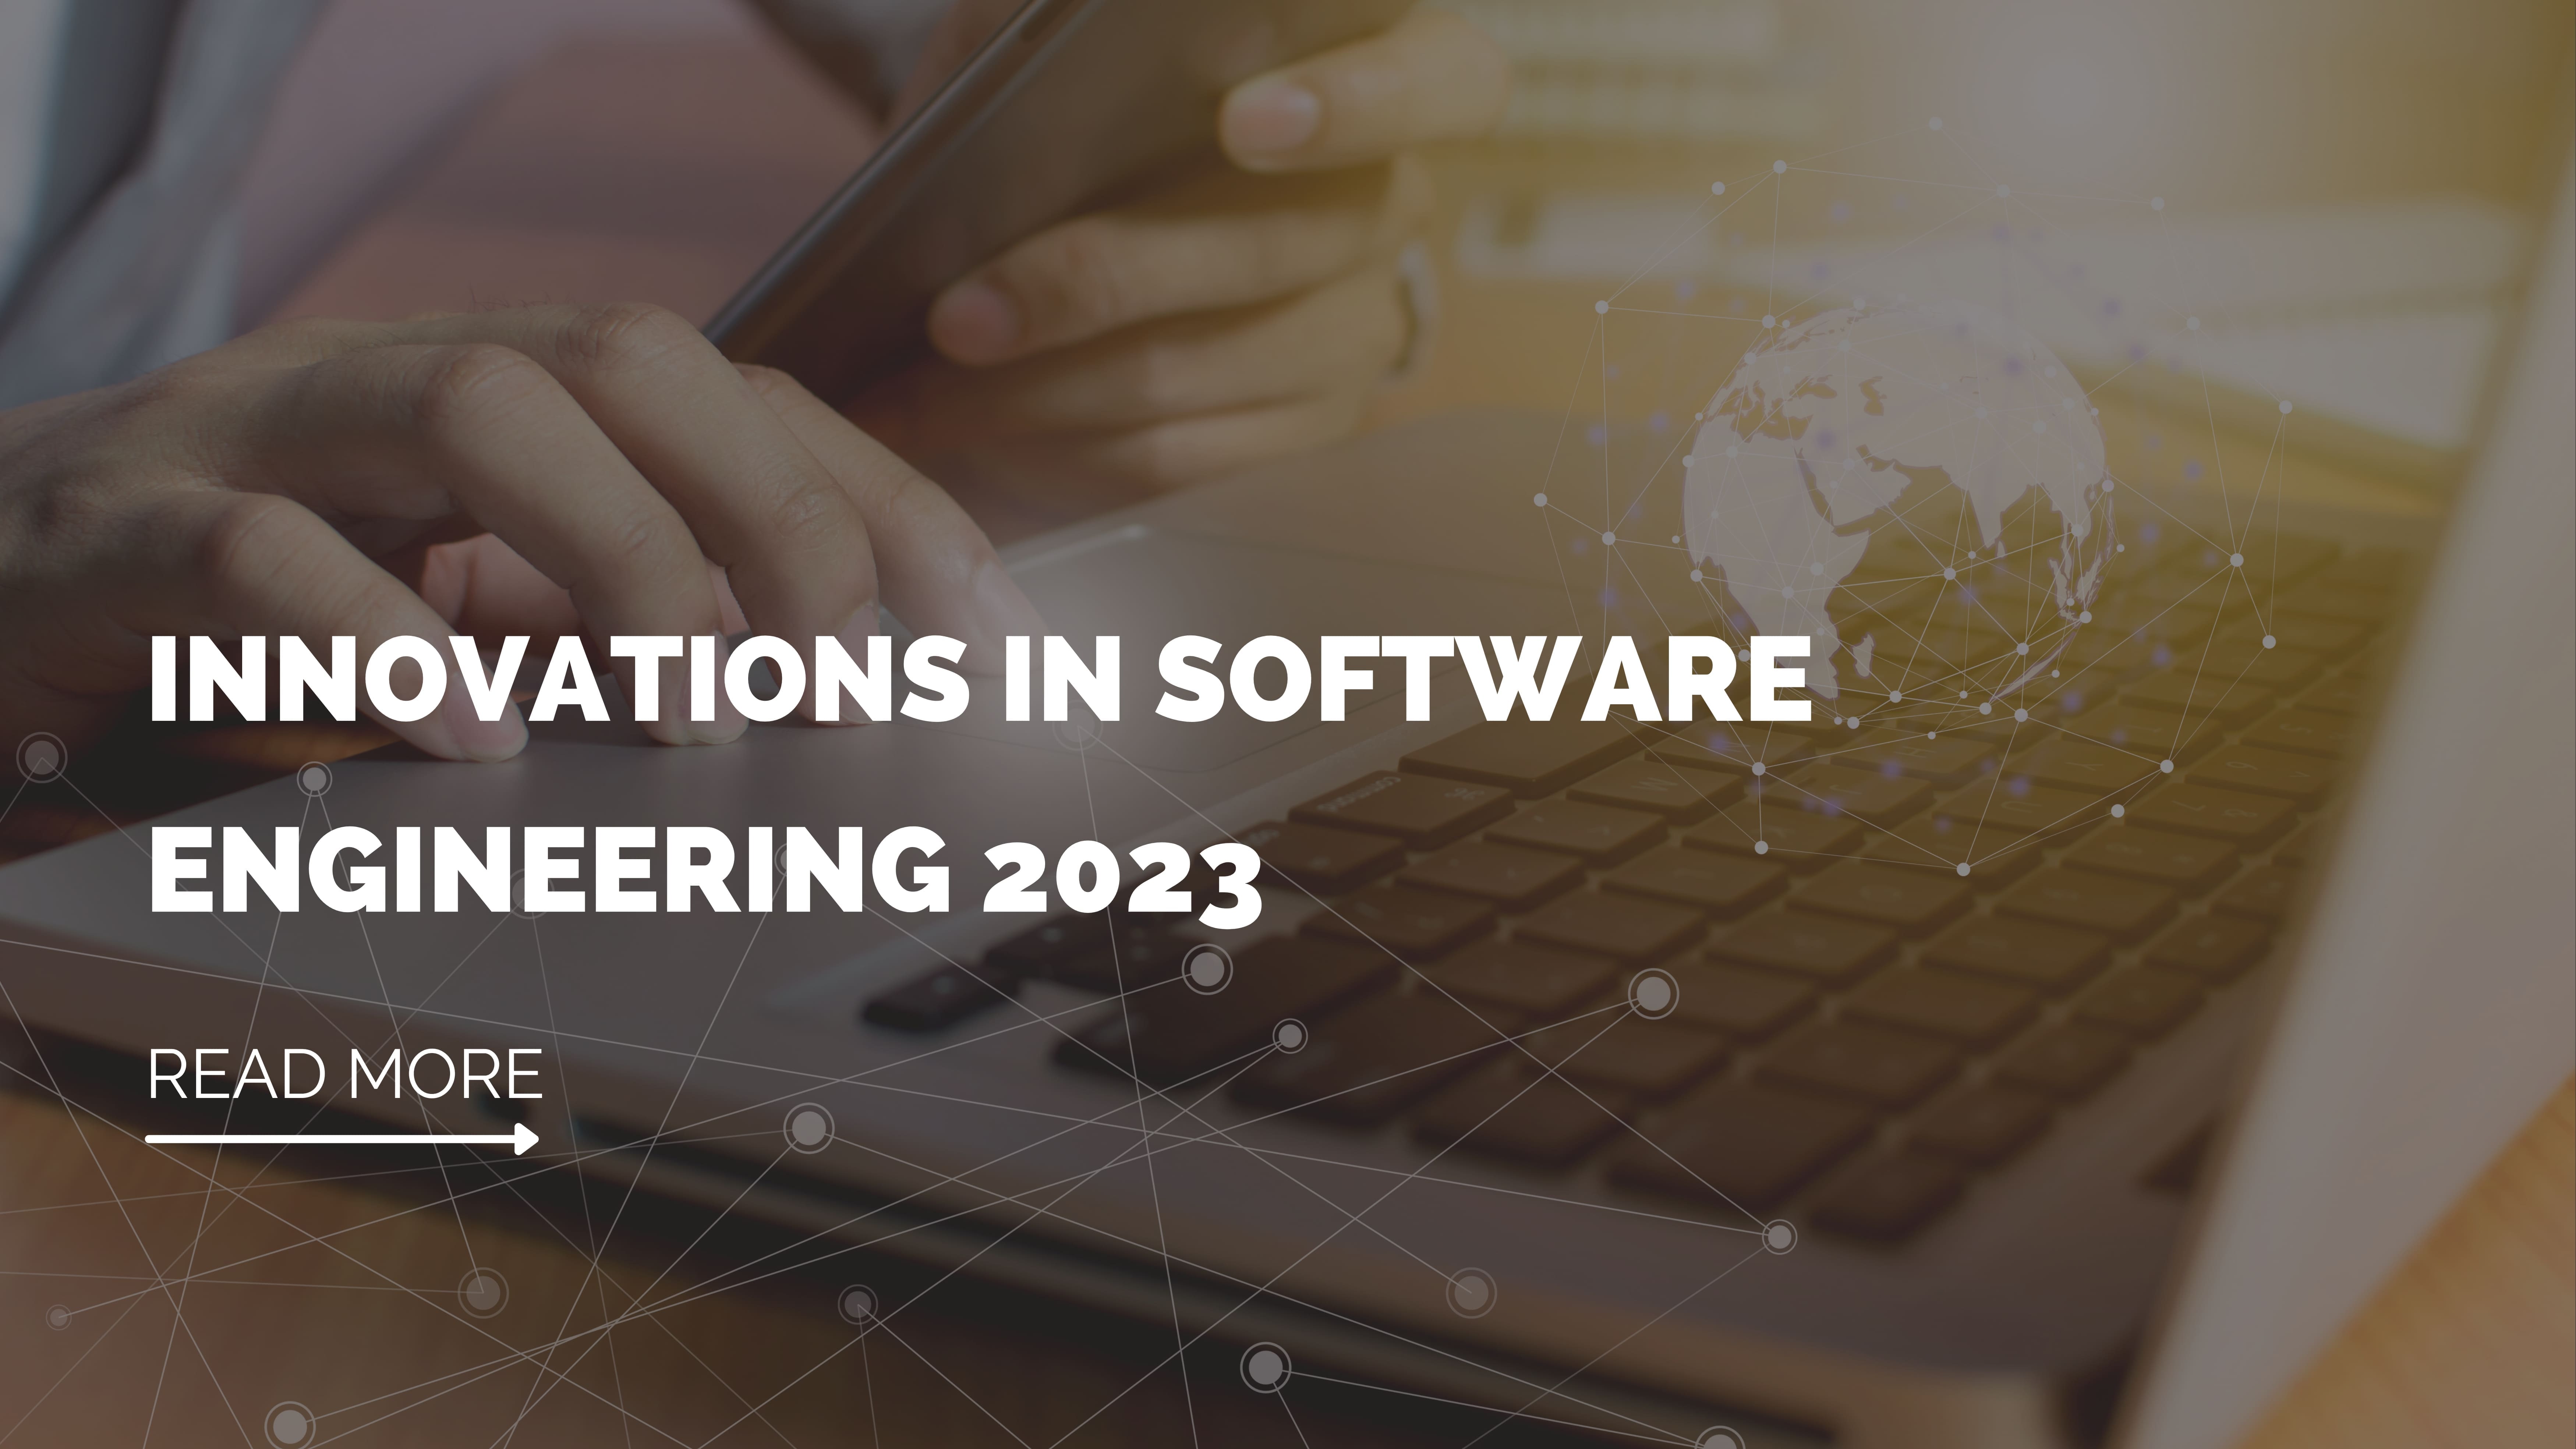 Innovations in software engineering 2023